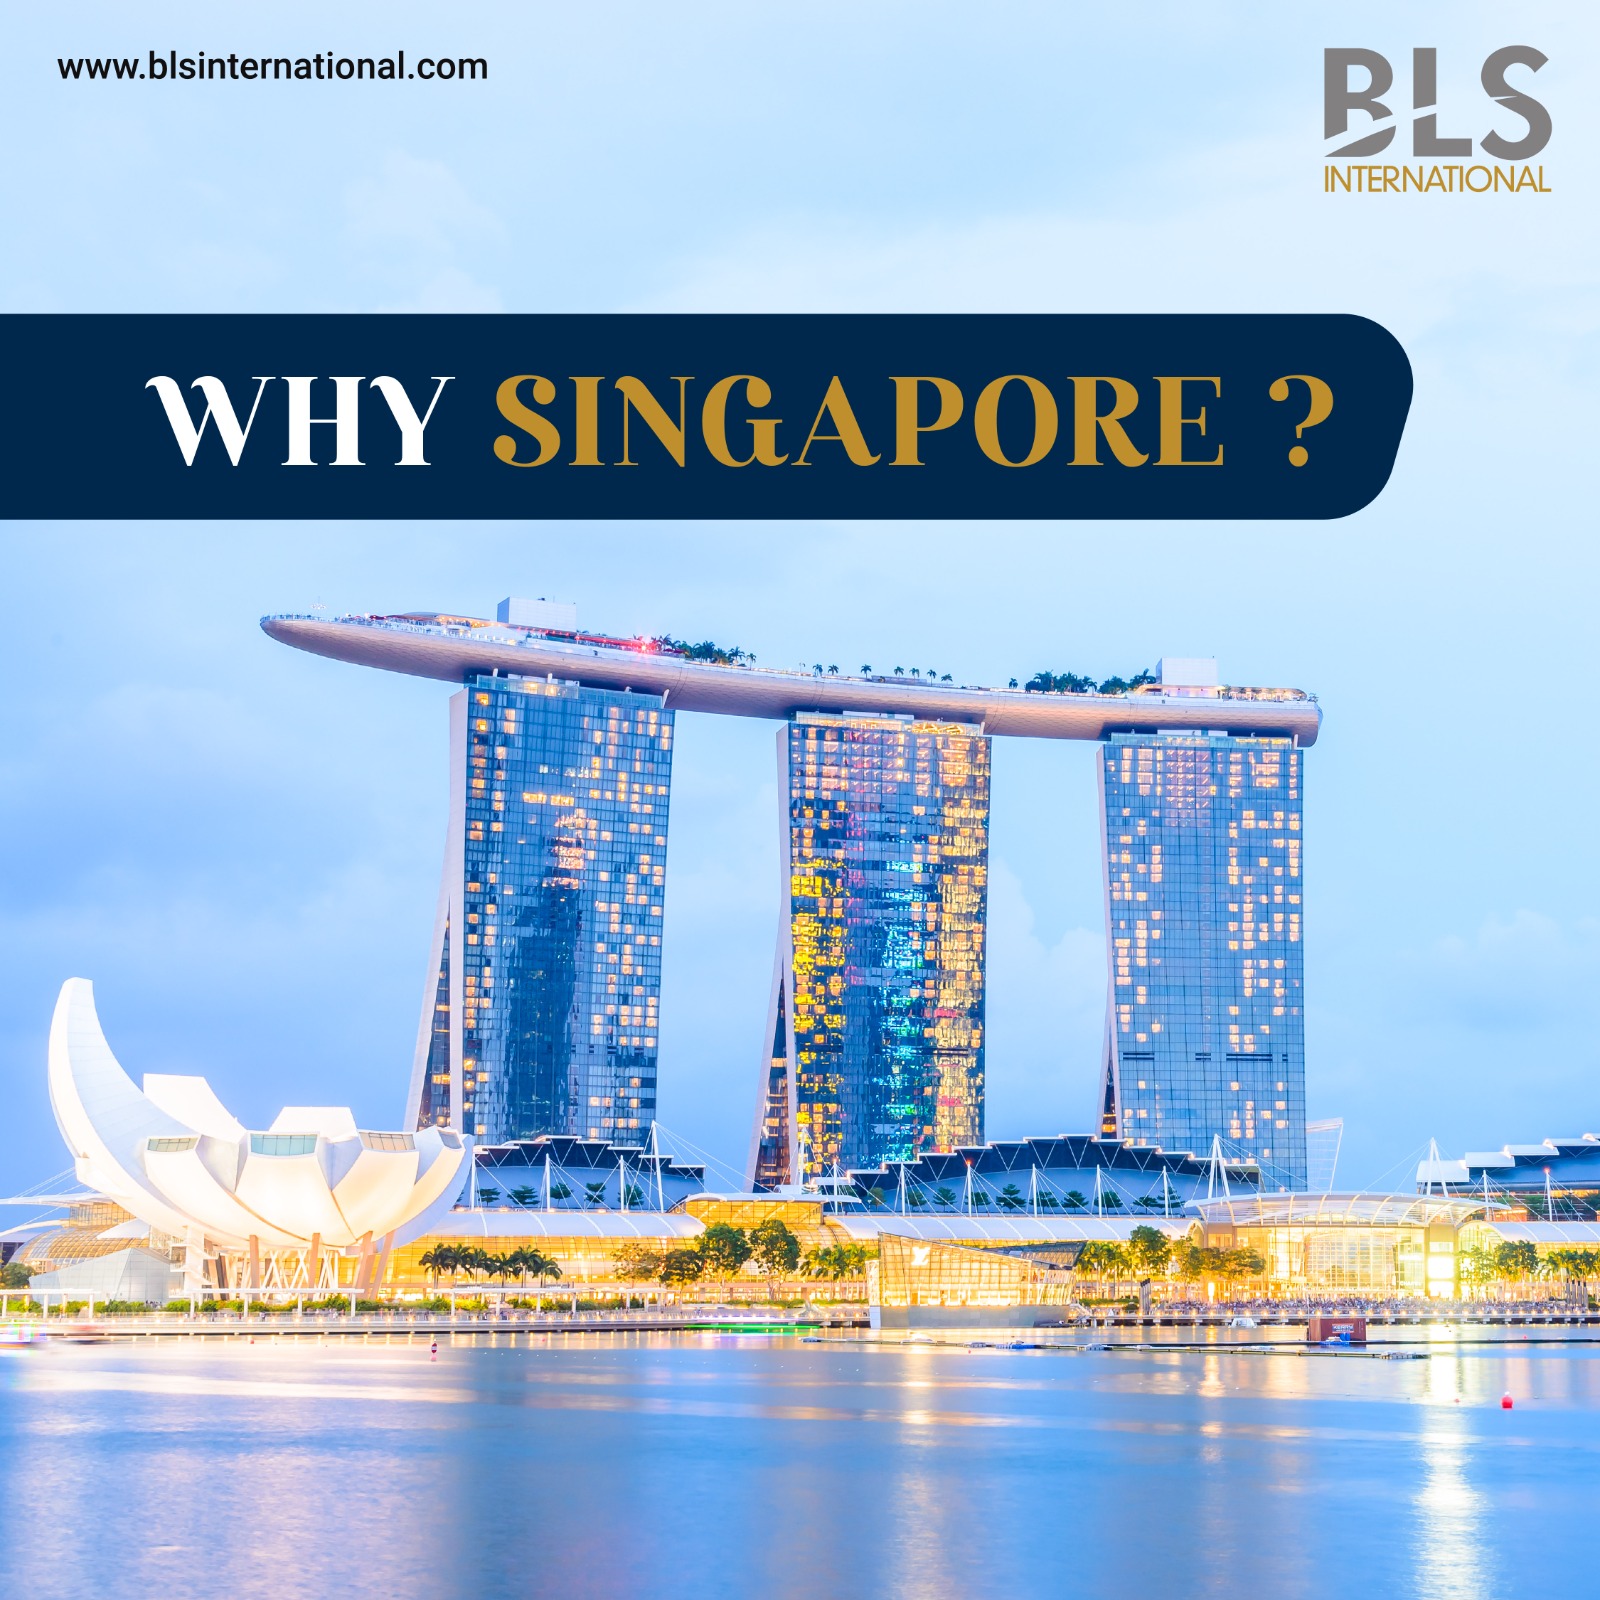 <strong>WHY SINGAPORE?</strong>